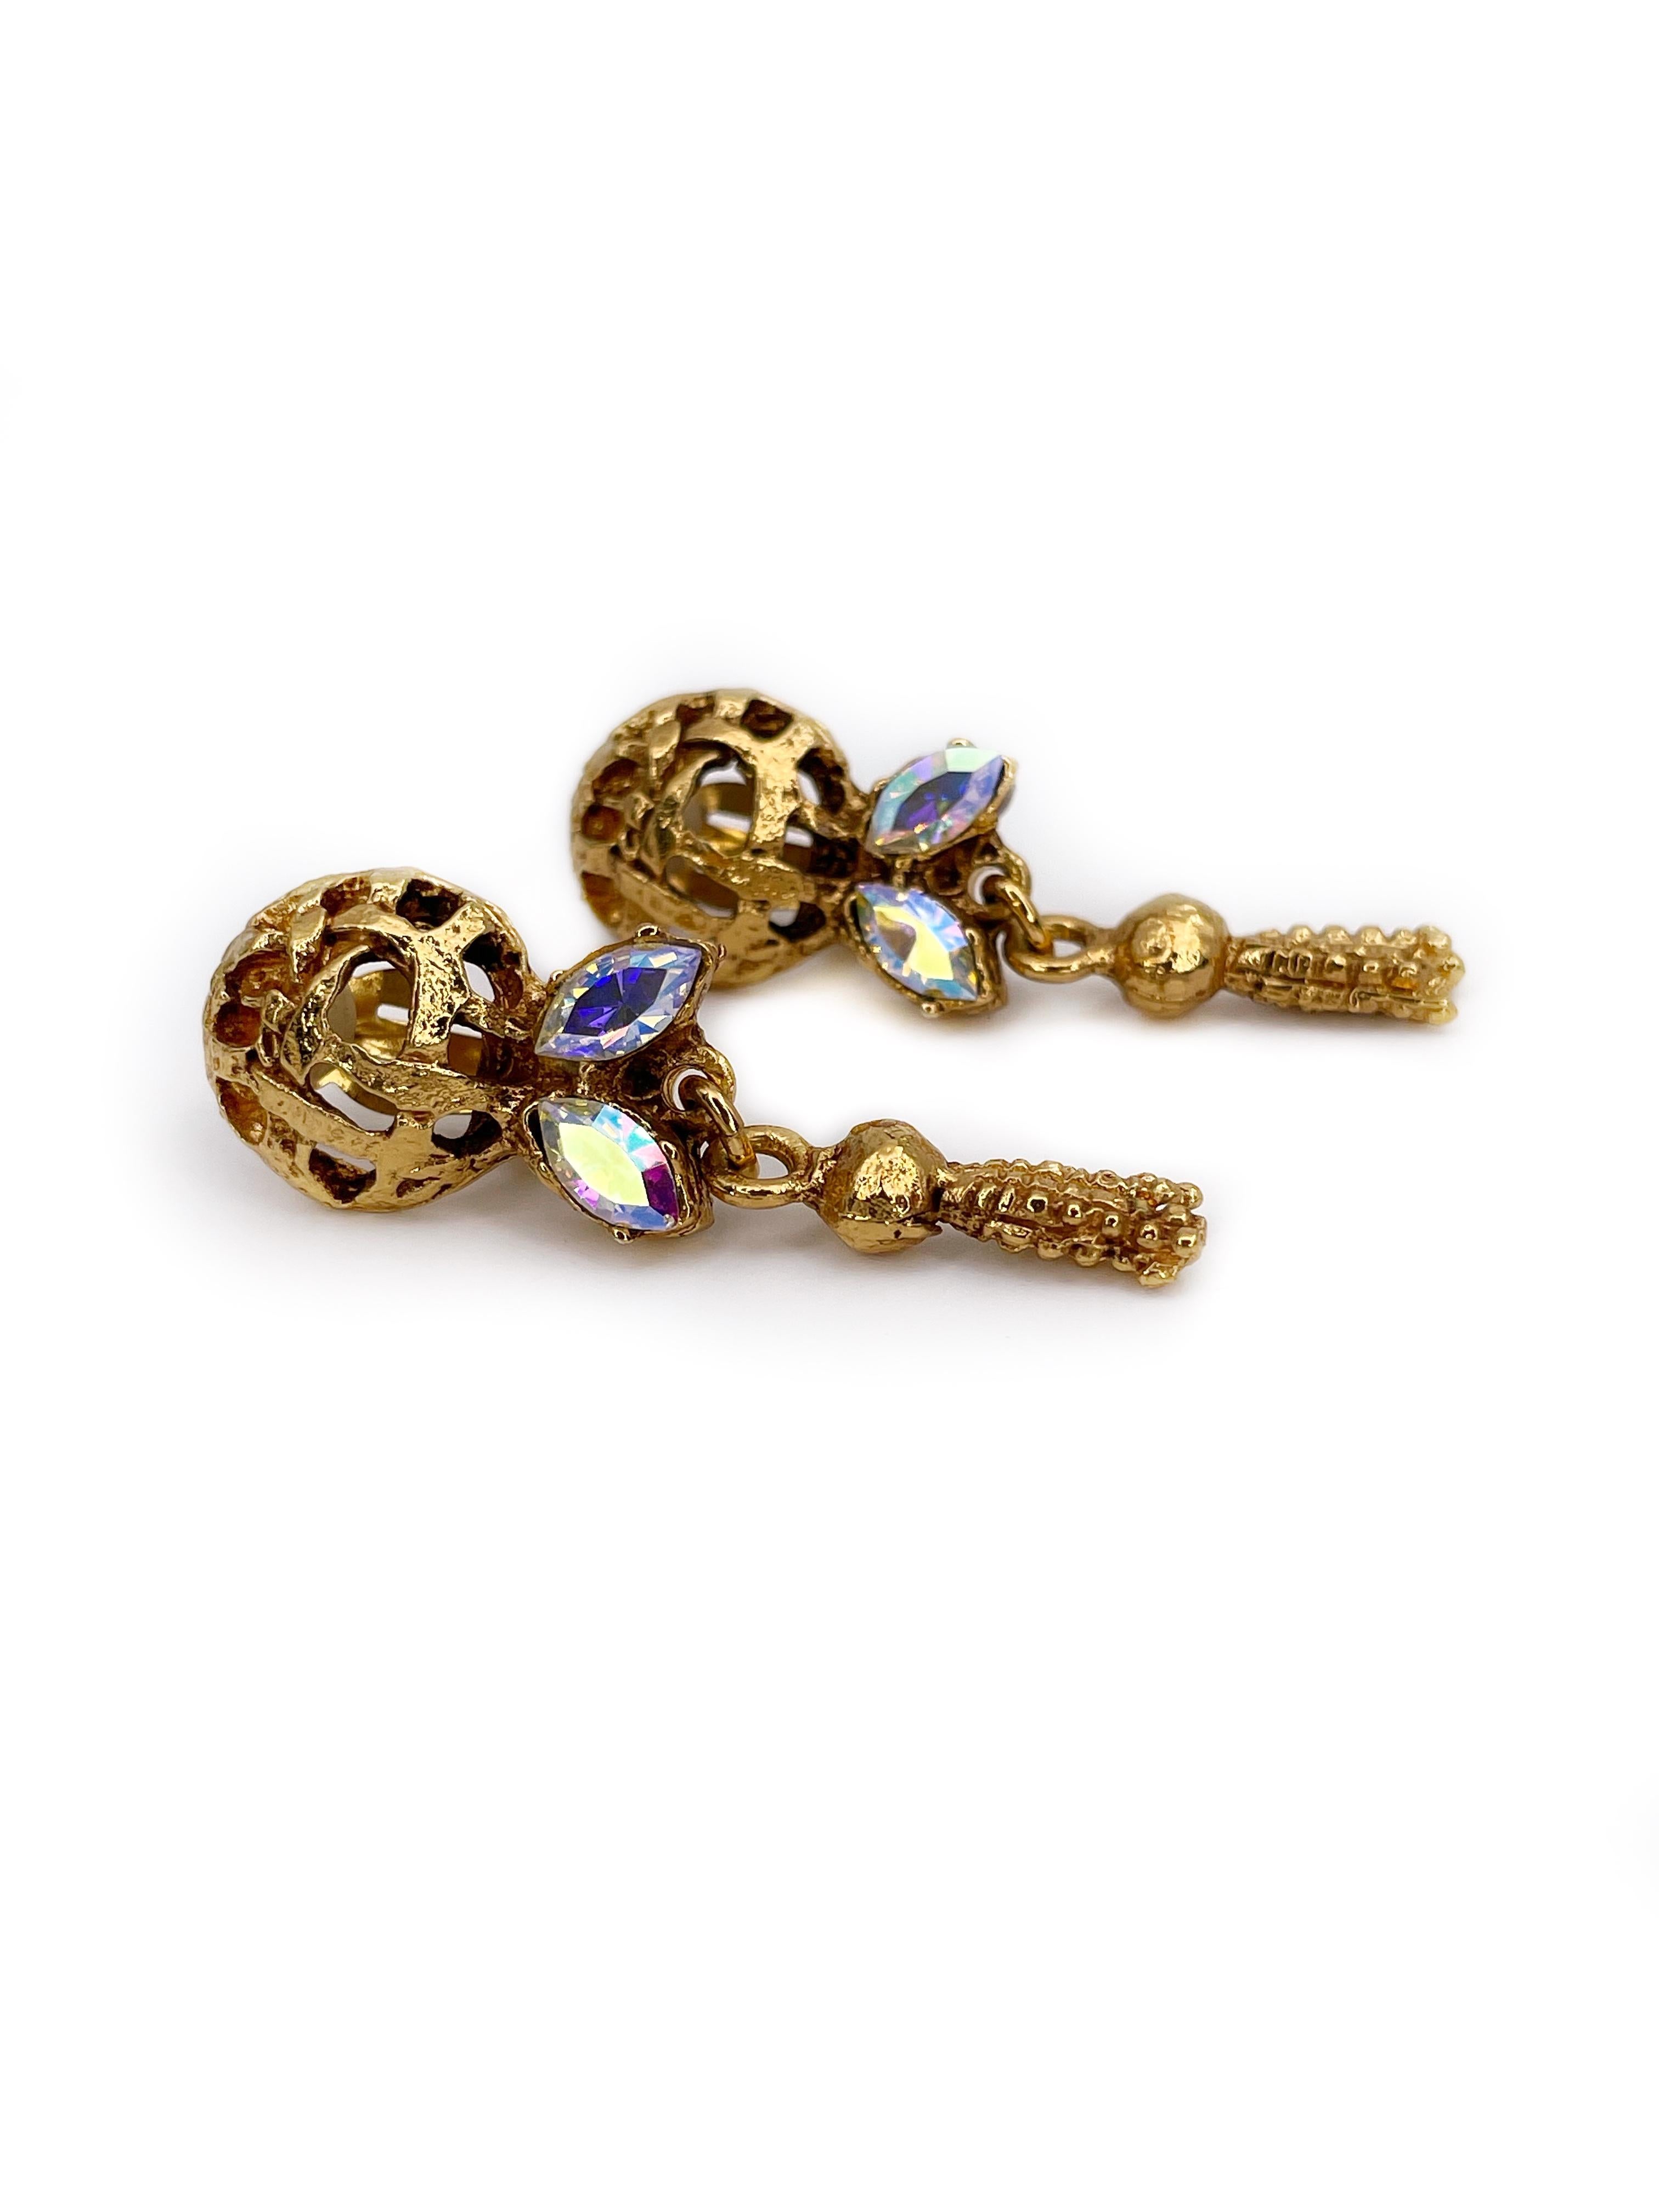 This is a shinny pair of earrings designed by Christian Lacroix in 1980’s. The piece is gold plated, decorated with four Aurora Borealis crystals. It features round openwork upper body and a dangling tassel motif. 

These clip on earrings could be a